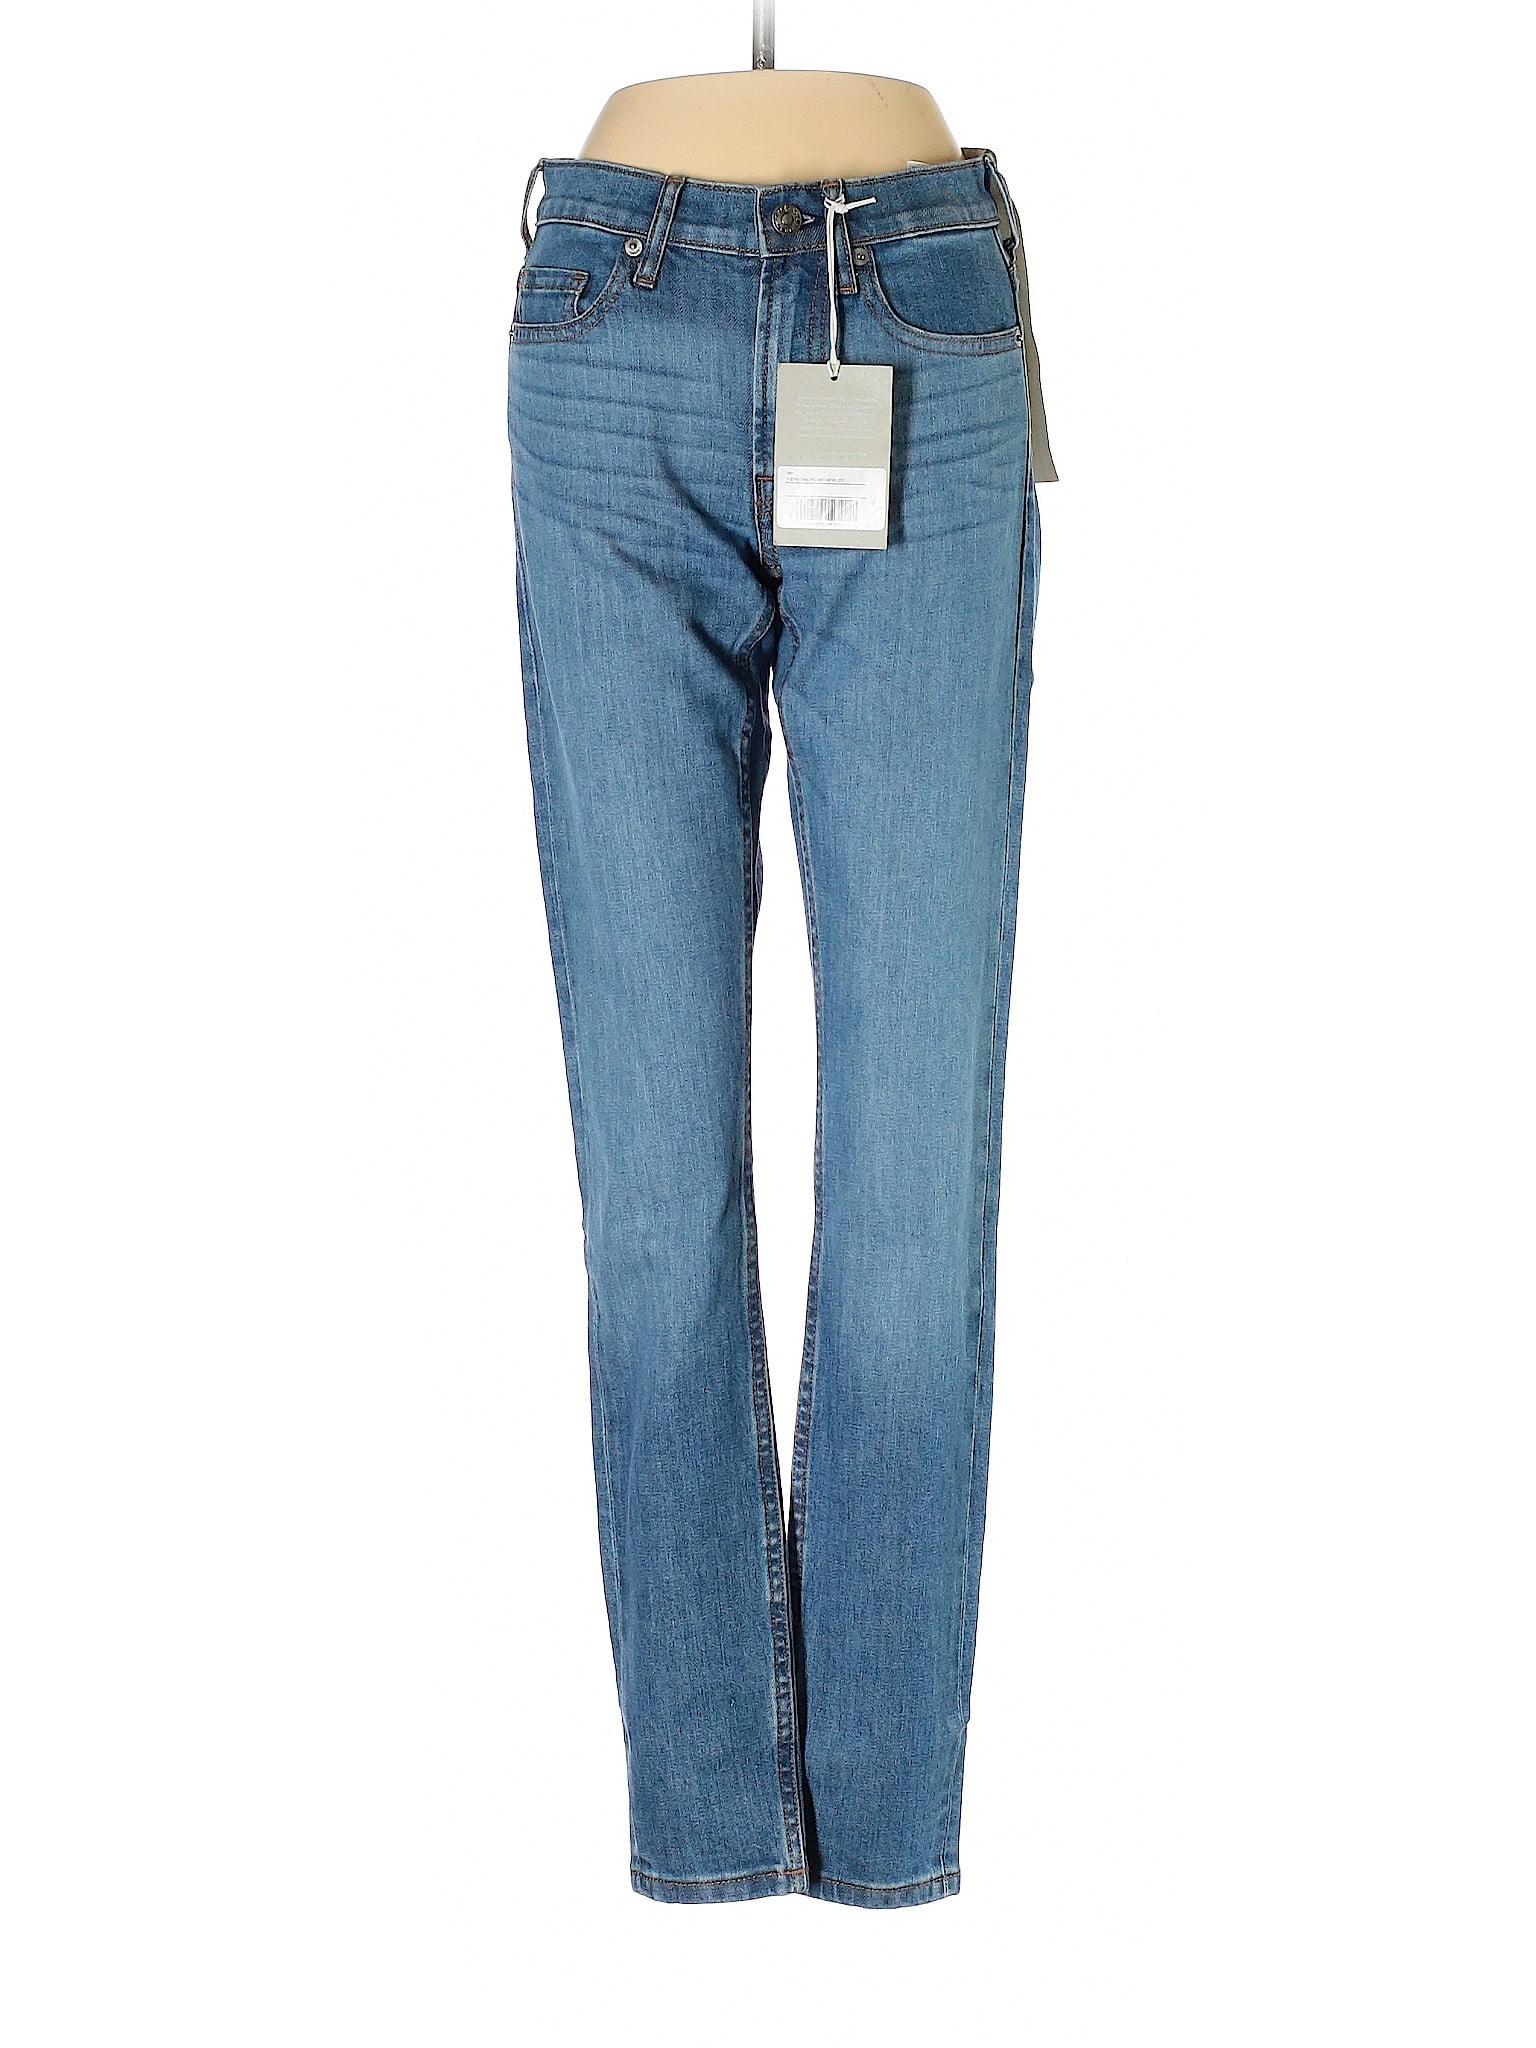 Pre-Owned Everlane Women's Size 23 Tall Jeans - Walmart.com